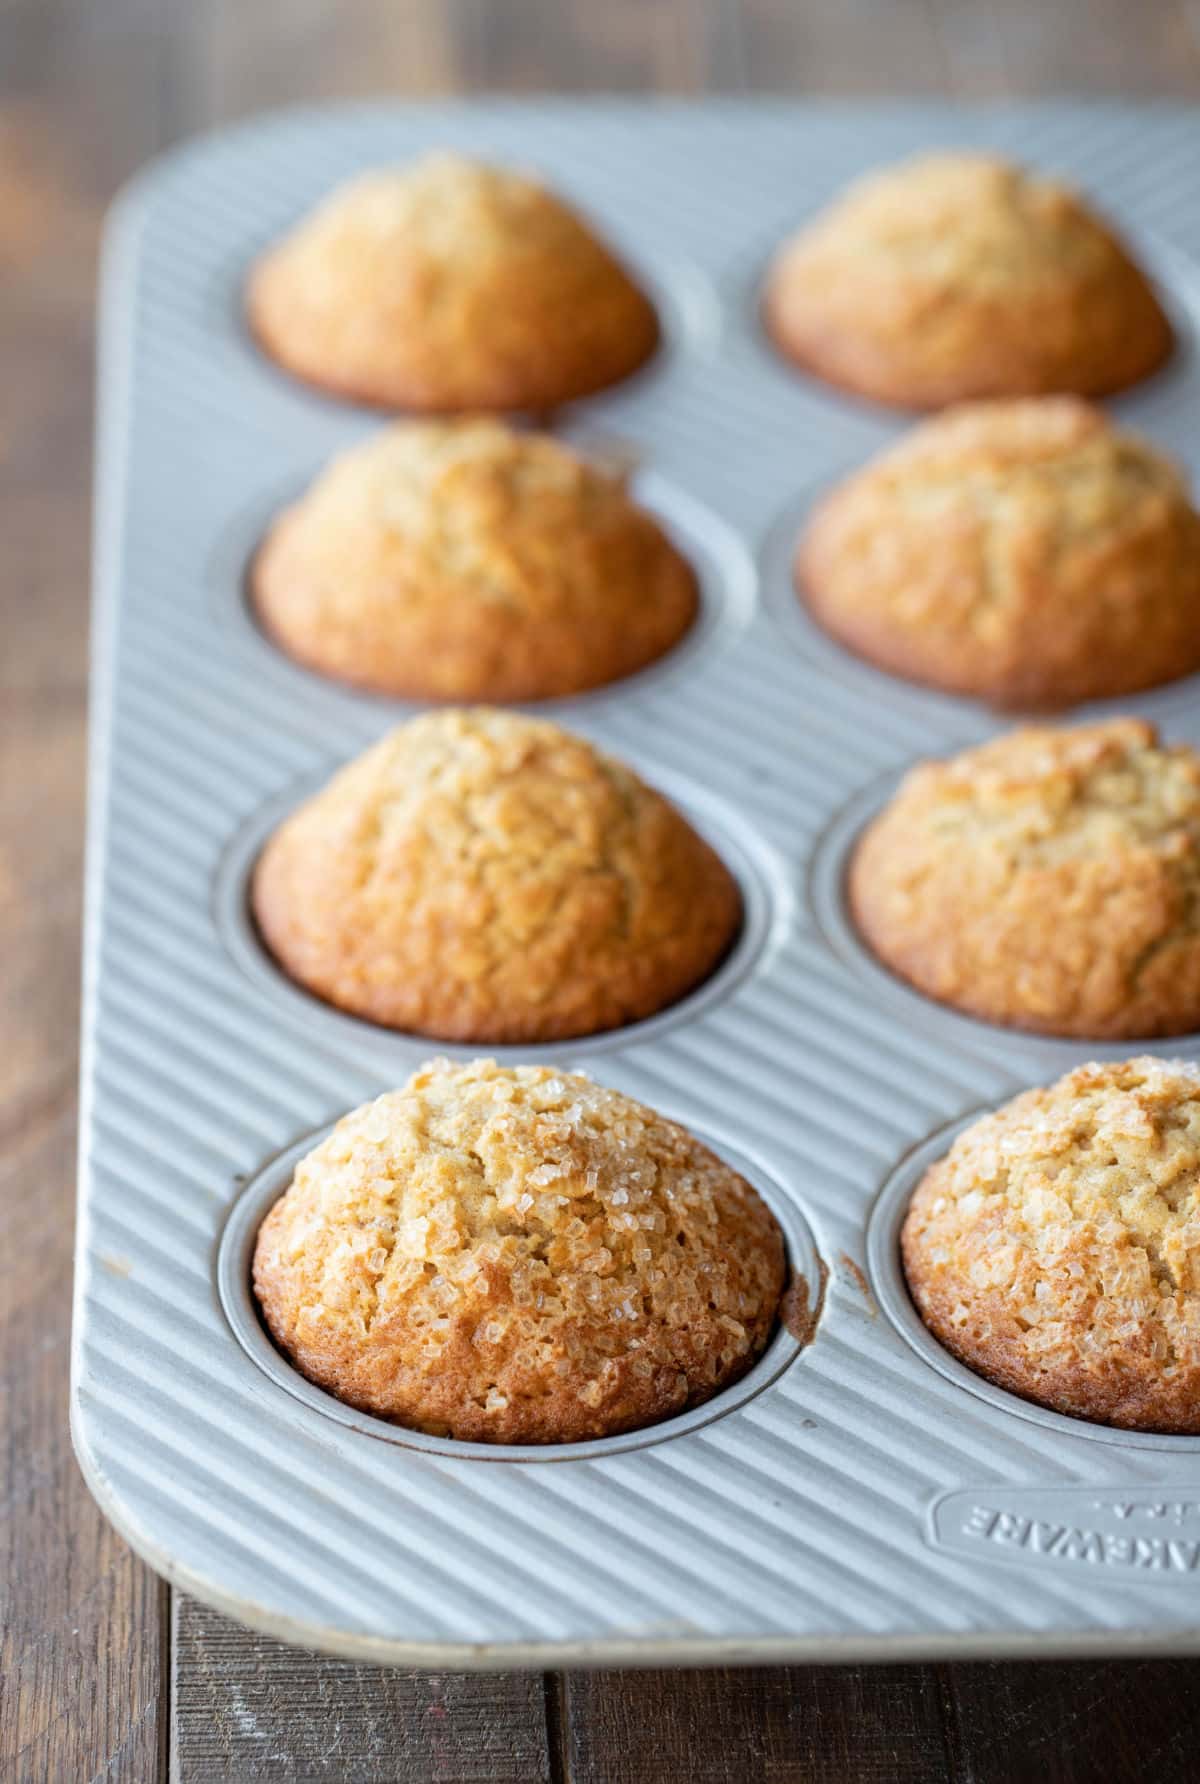 Baked oatmeal muffins in a silver muffin tin.